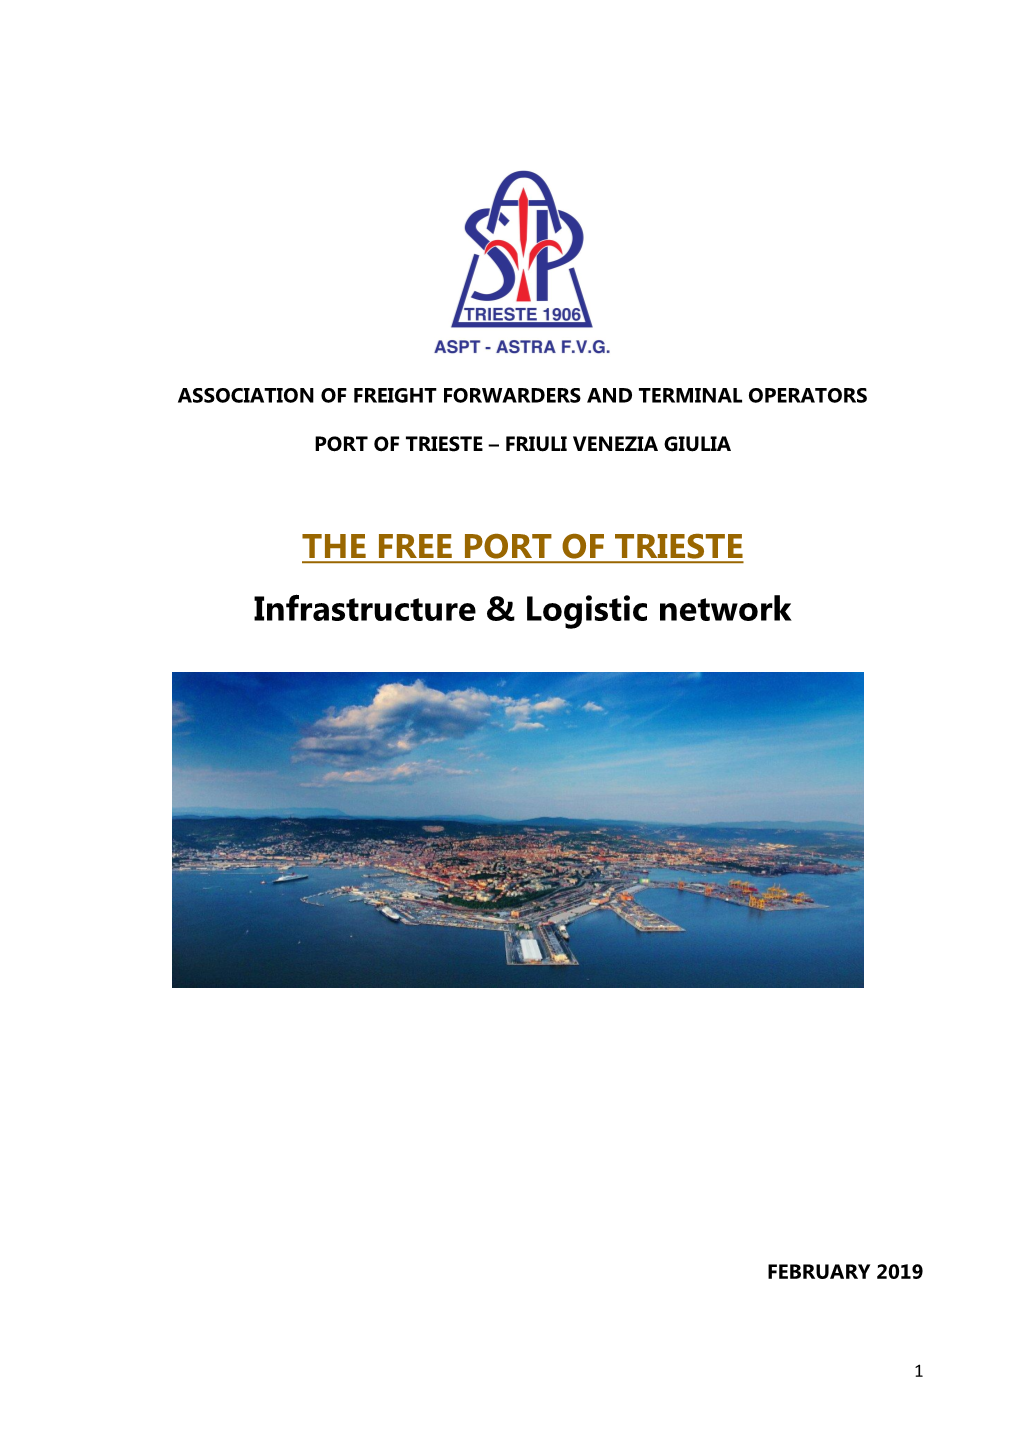 THE FREE PORT of TRIESTE Infrastructure & Logistic Network